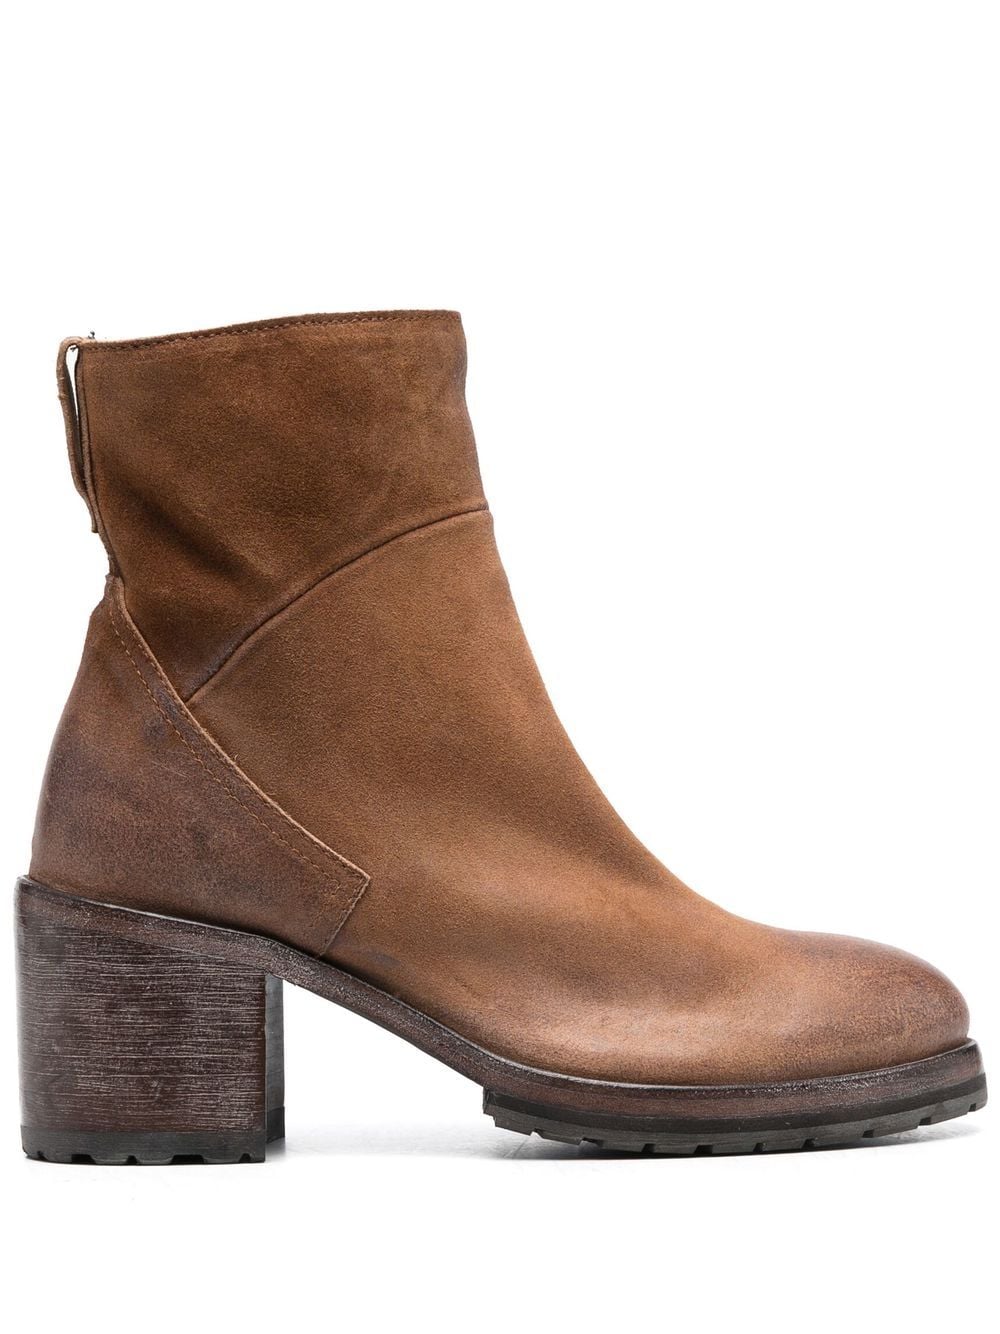 Moma 70mm leather ankle boots - Brown von Moma